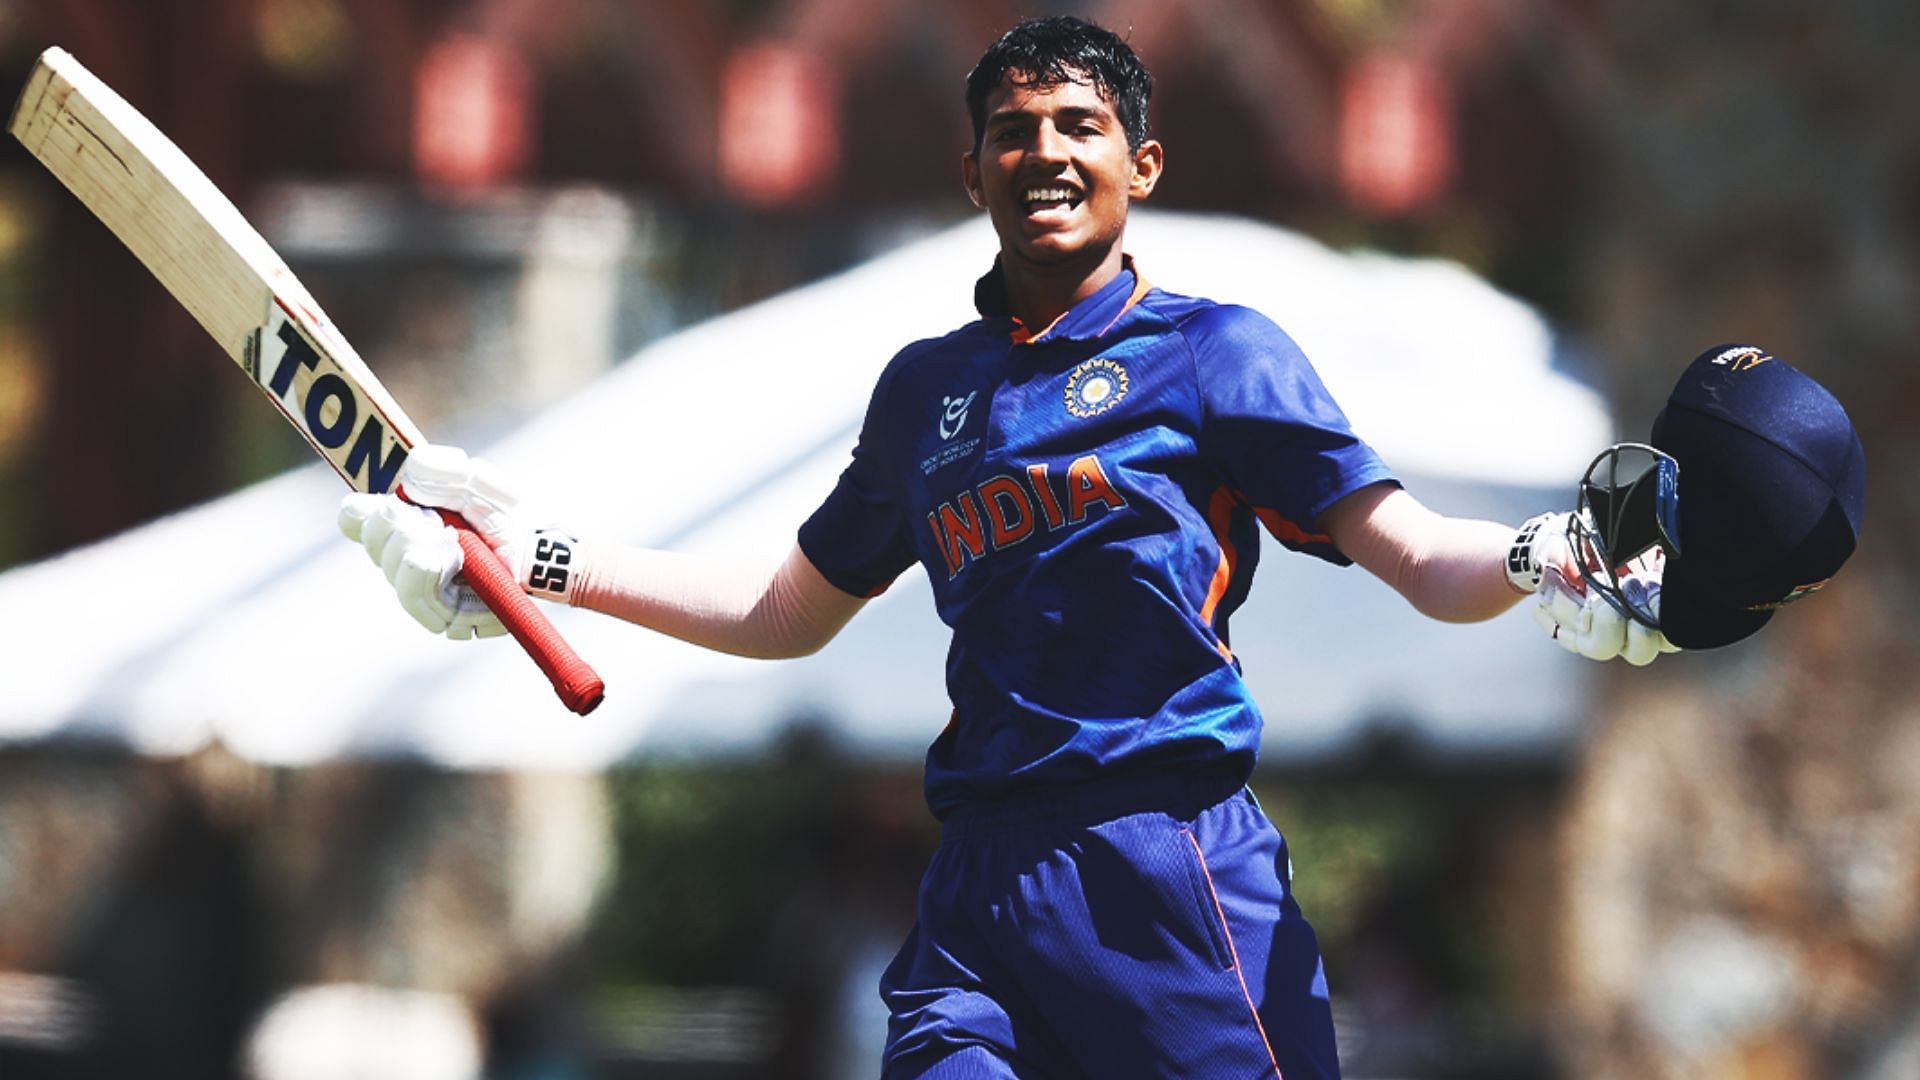 Skipper Yash Dhull was the star for India in their previous U19 World Cup semifinal